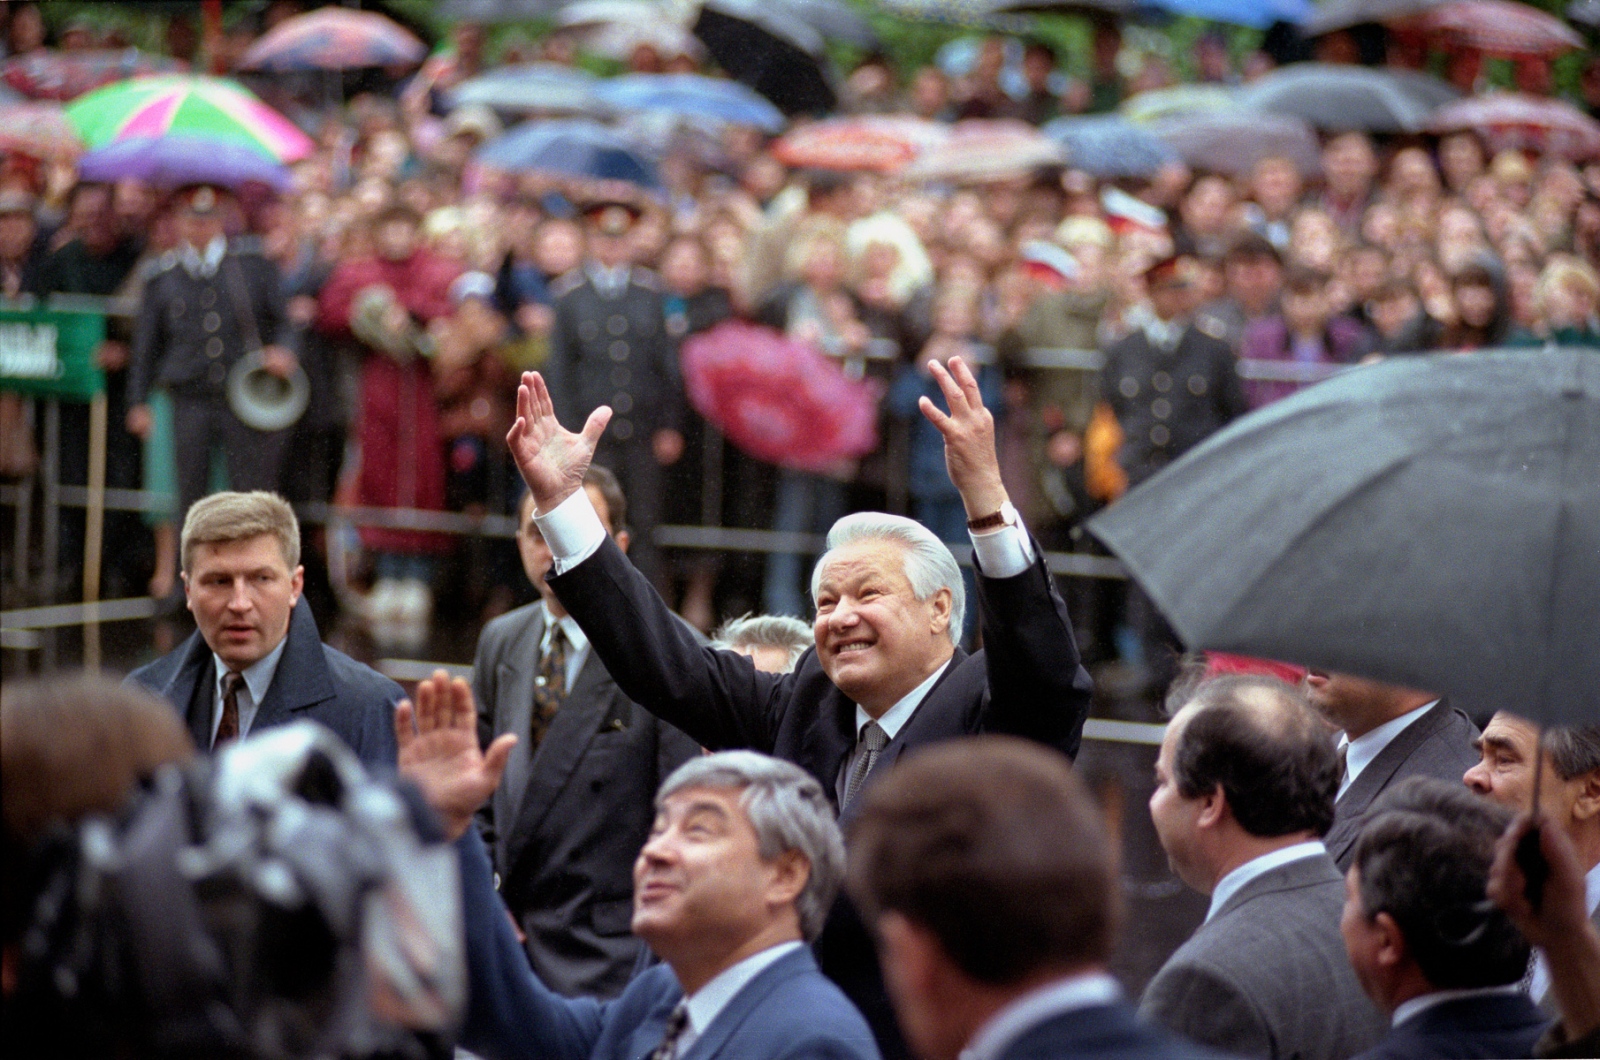 Russia In Transition - 1990s - Boris Yeltsin gets a warm welcome during his campaign...